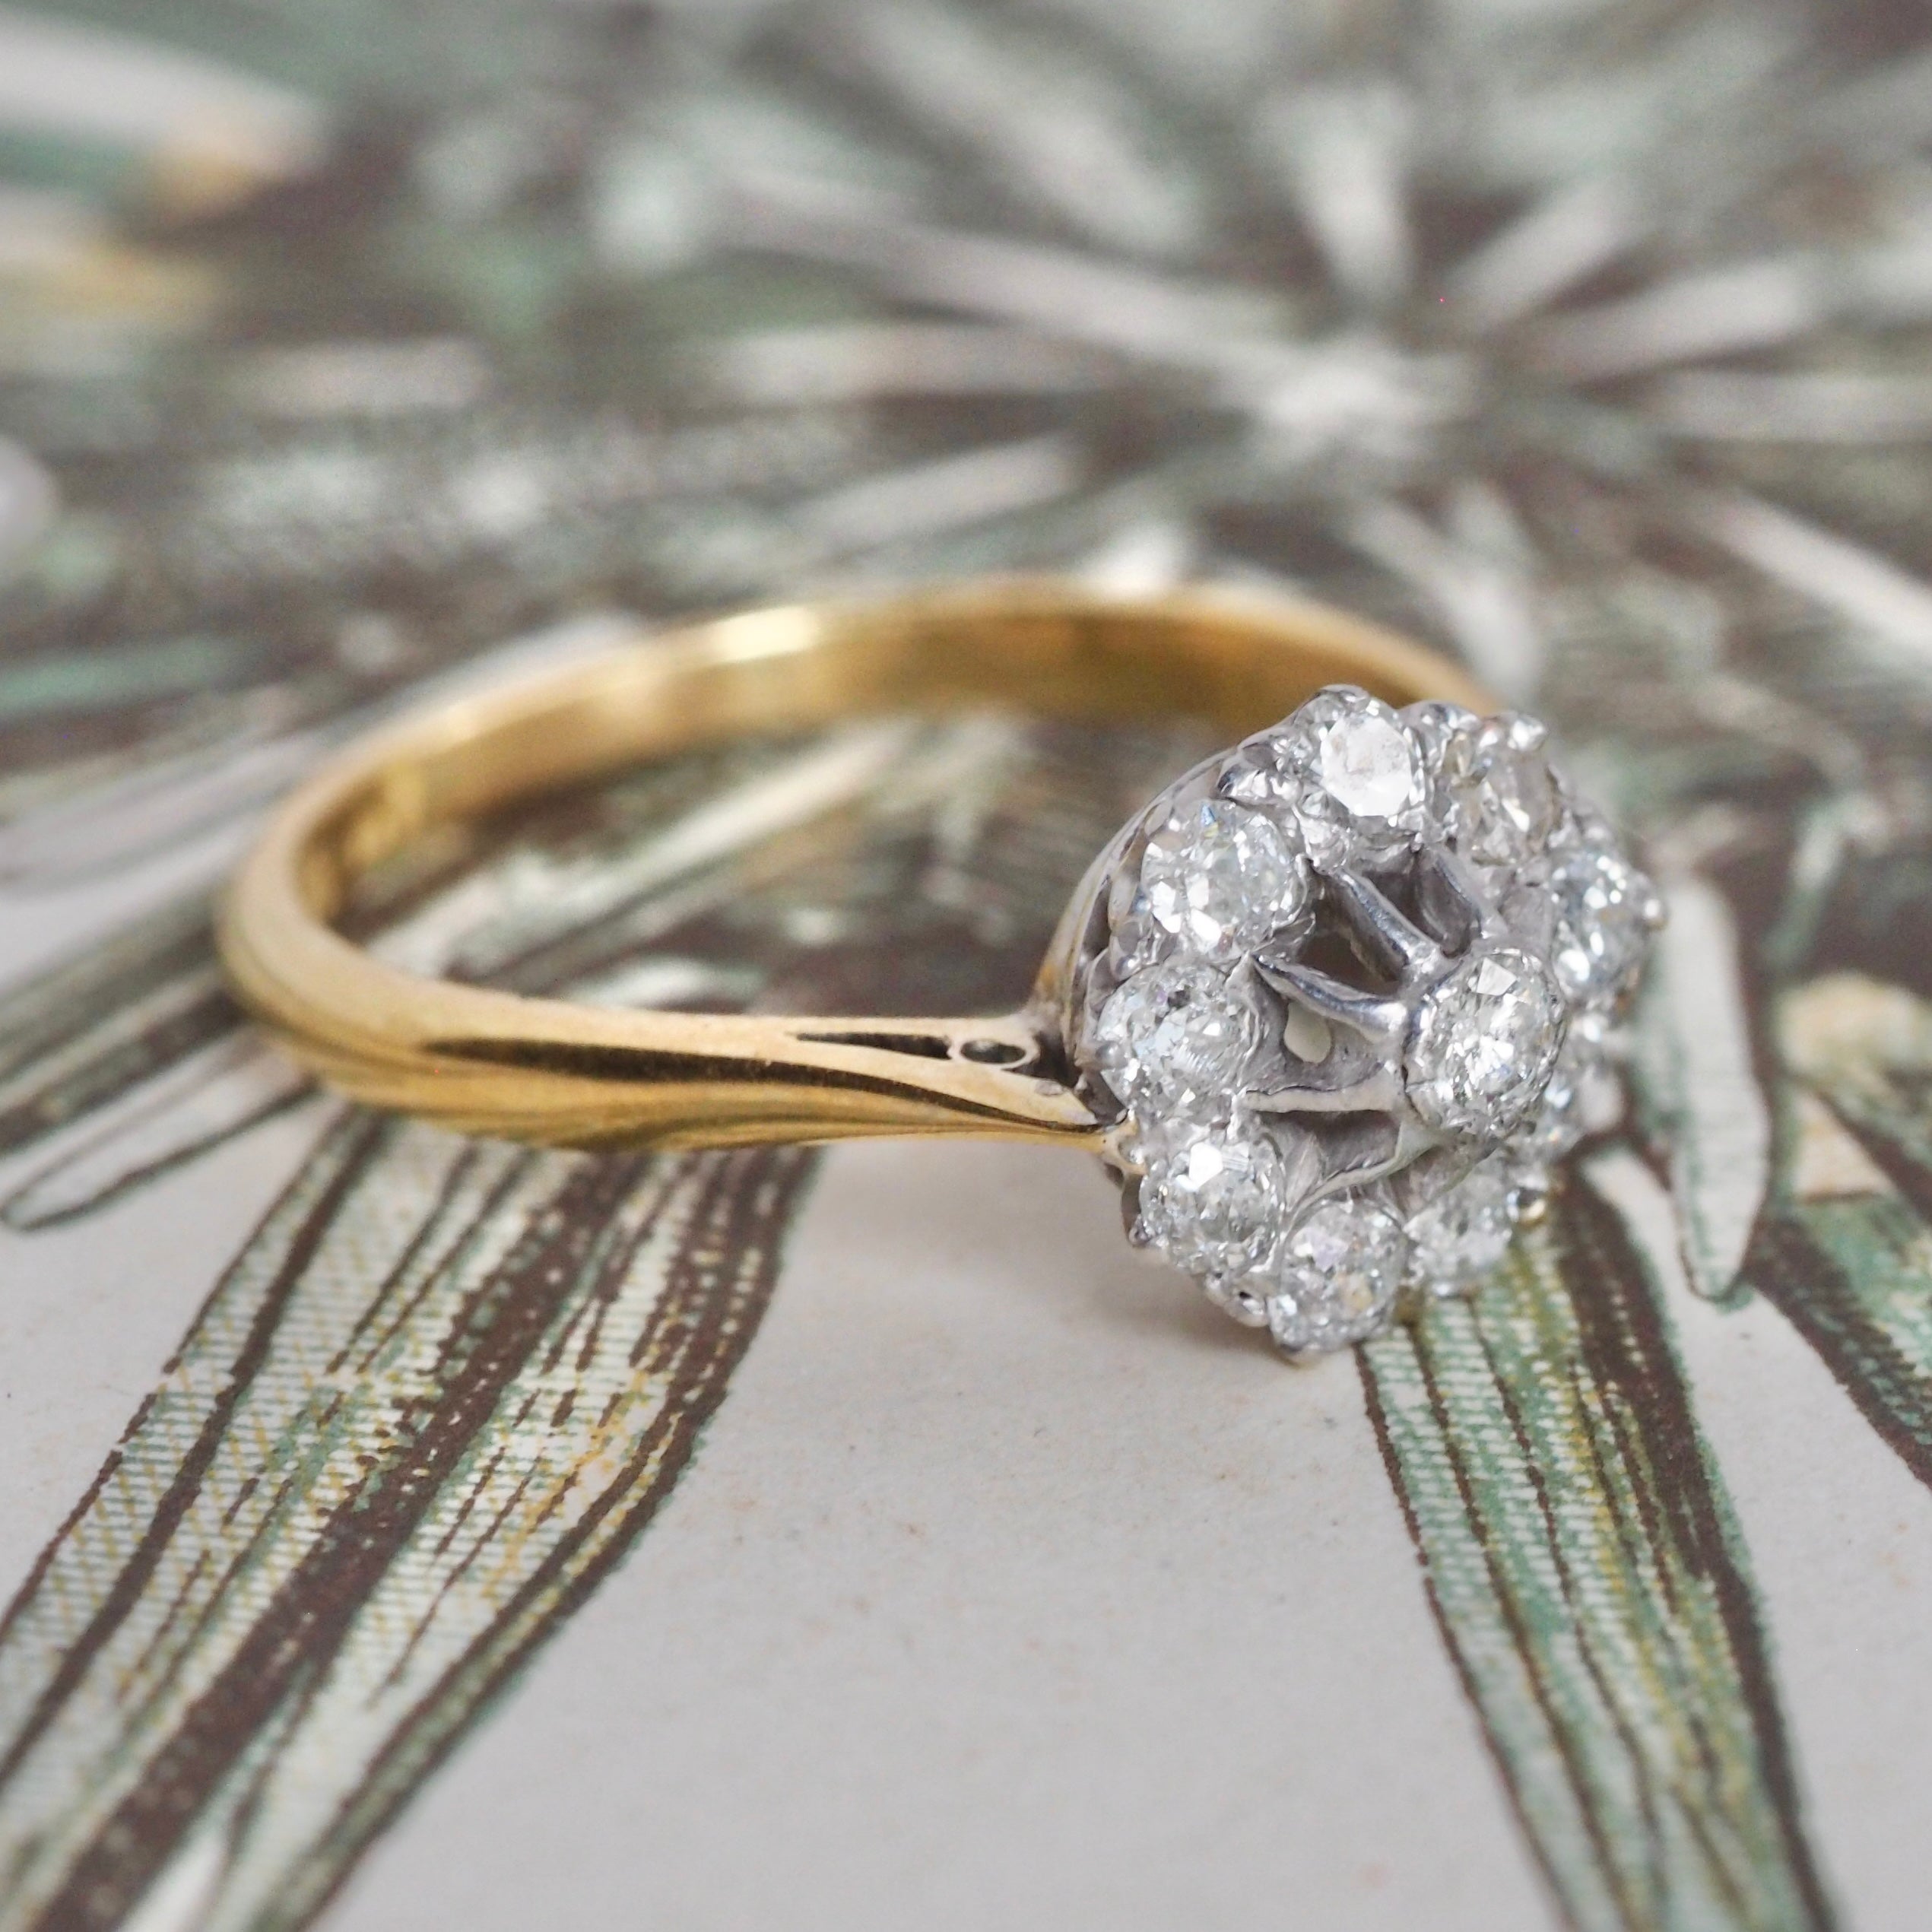 Antique 18k Gold and Platinum Old Mine Cut Diamond Cluster Ring